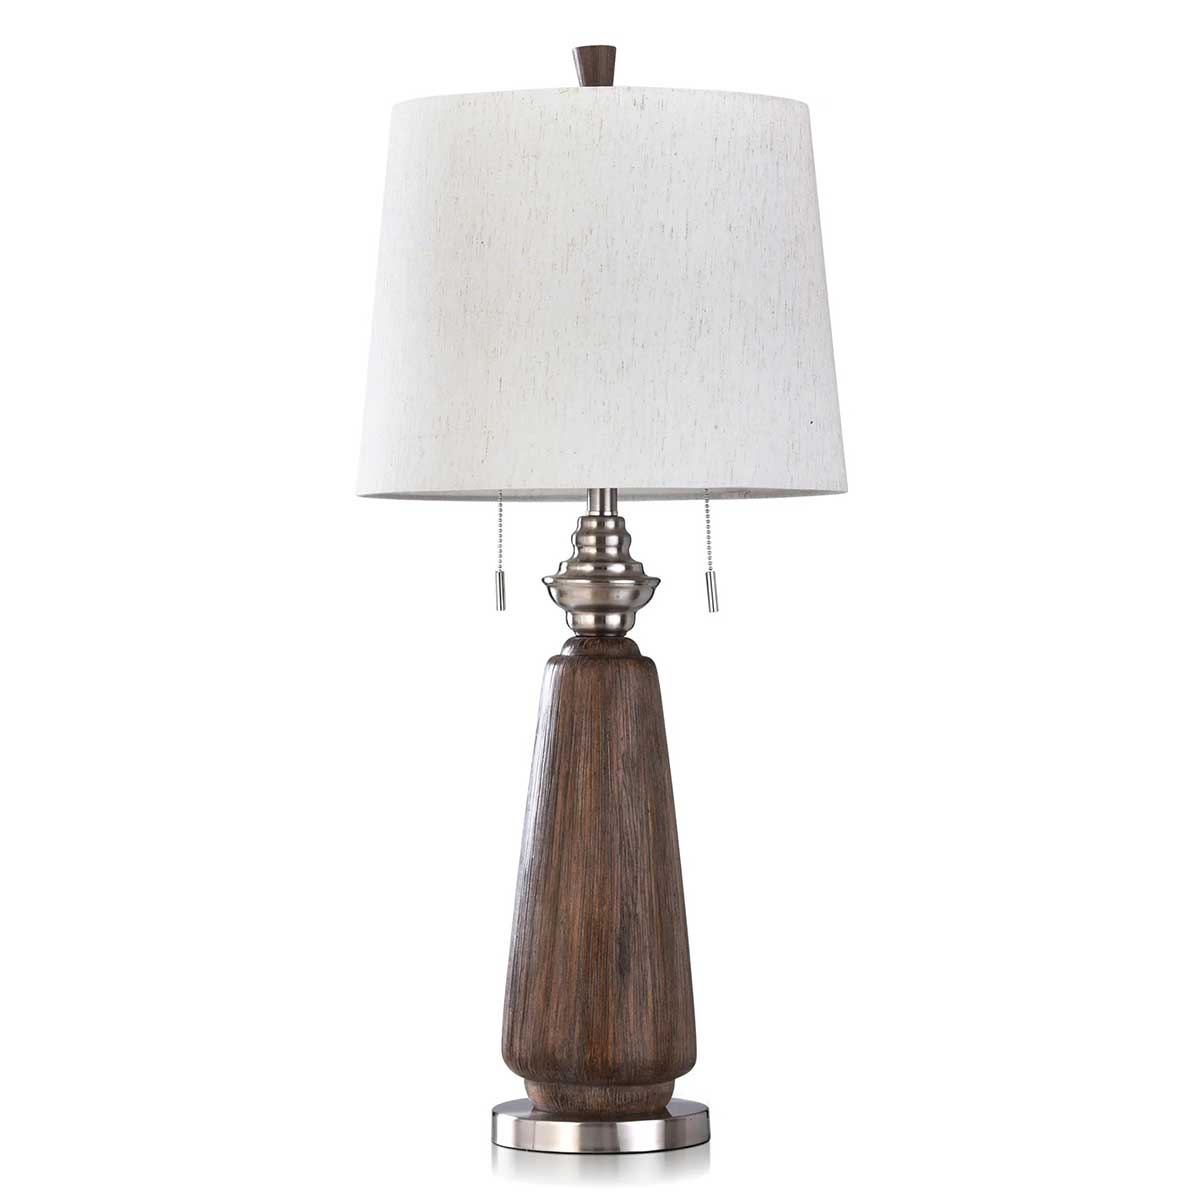 Style Craft Allerton Table Lamp